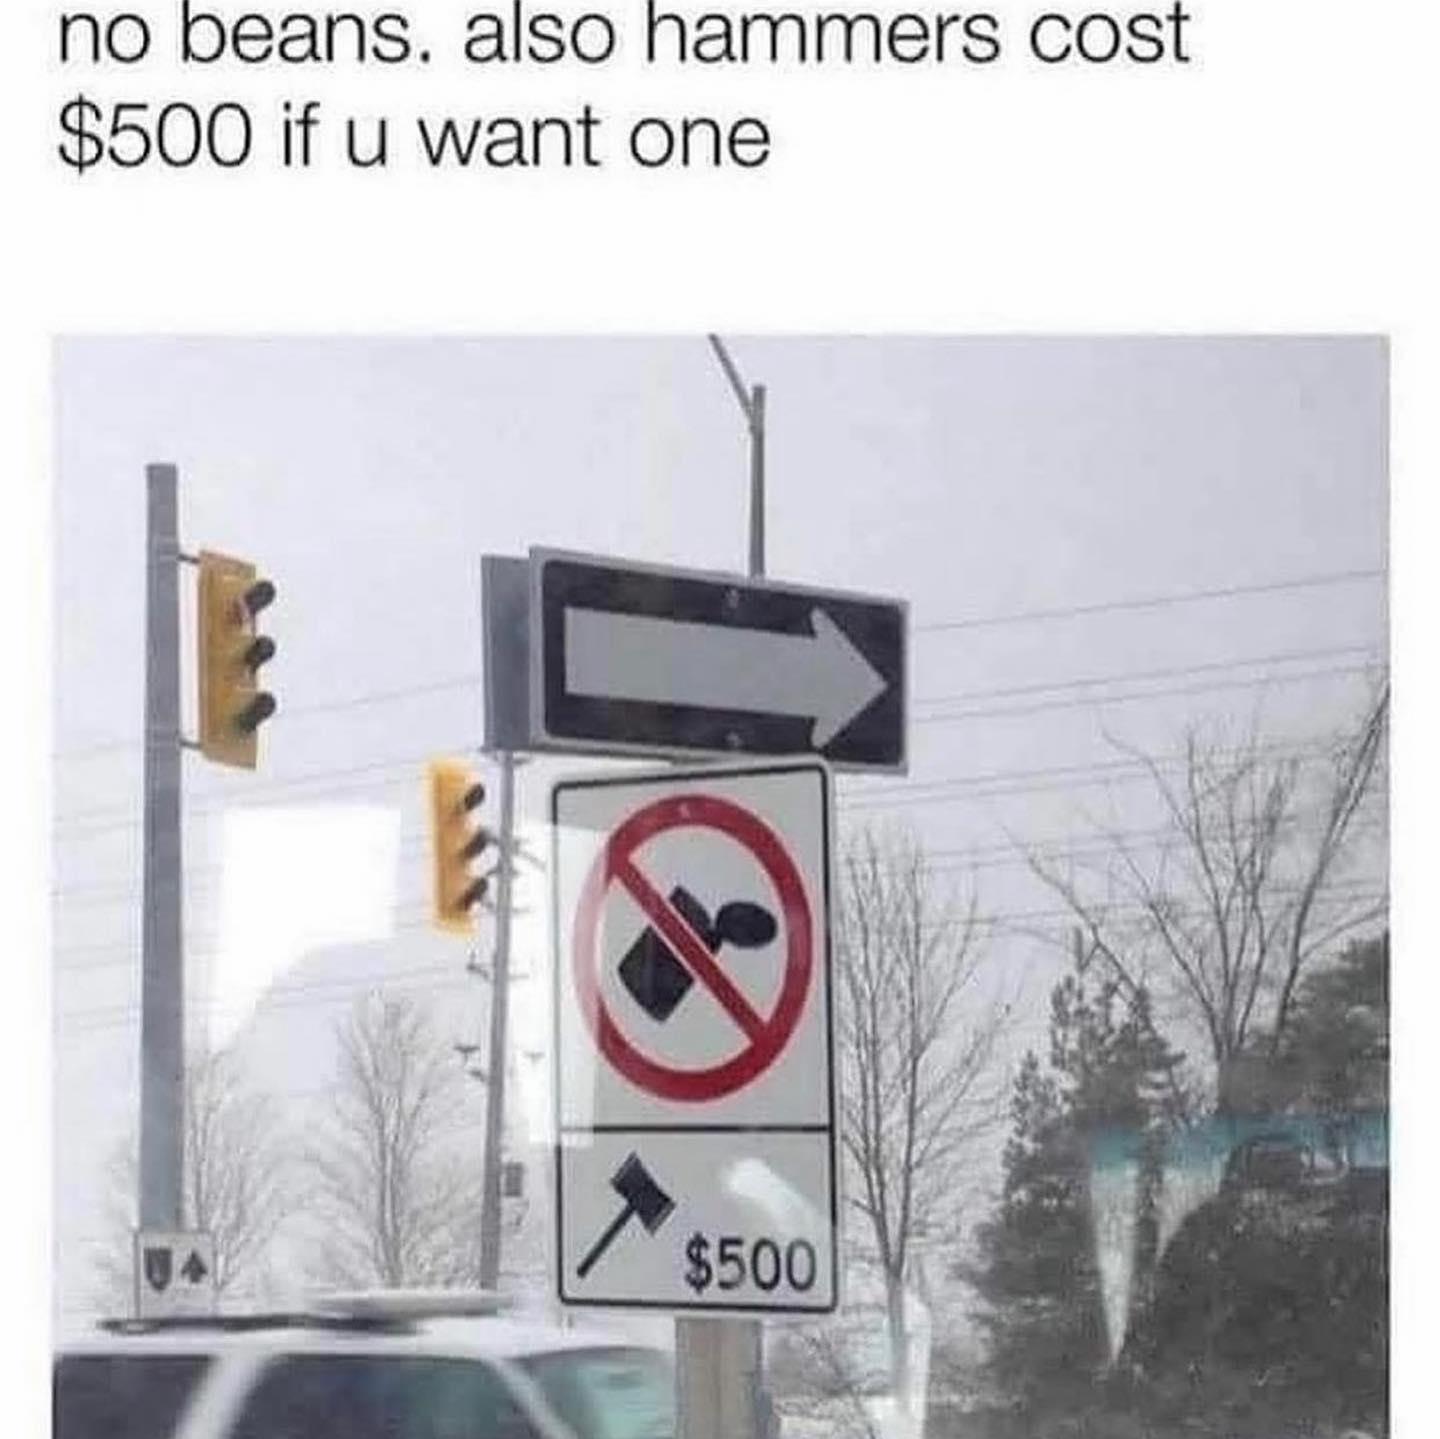 no beans, also hammers cost 500$ if you want one